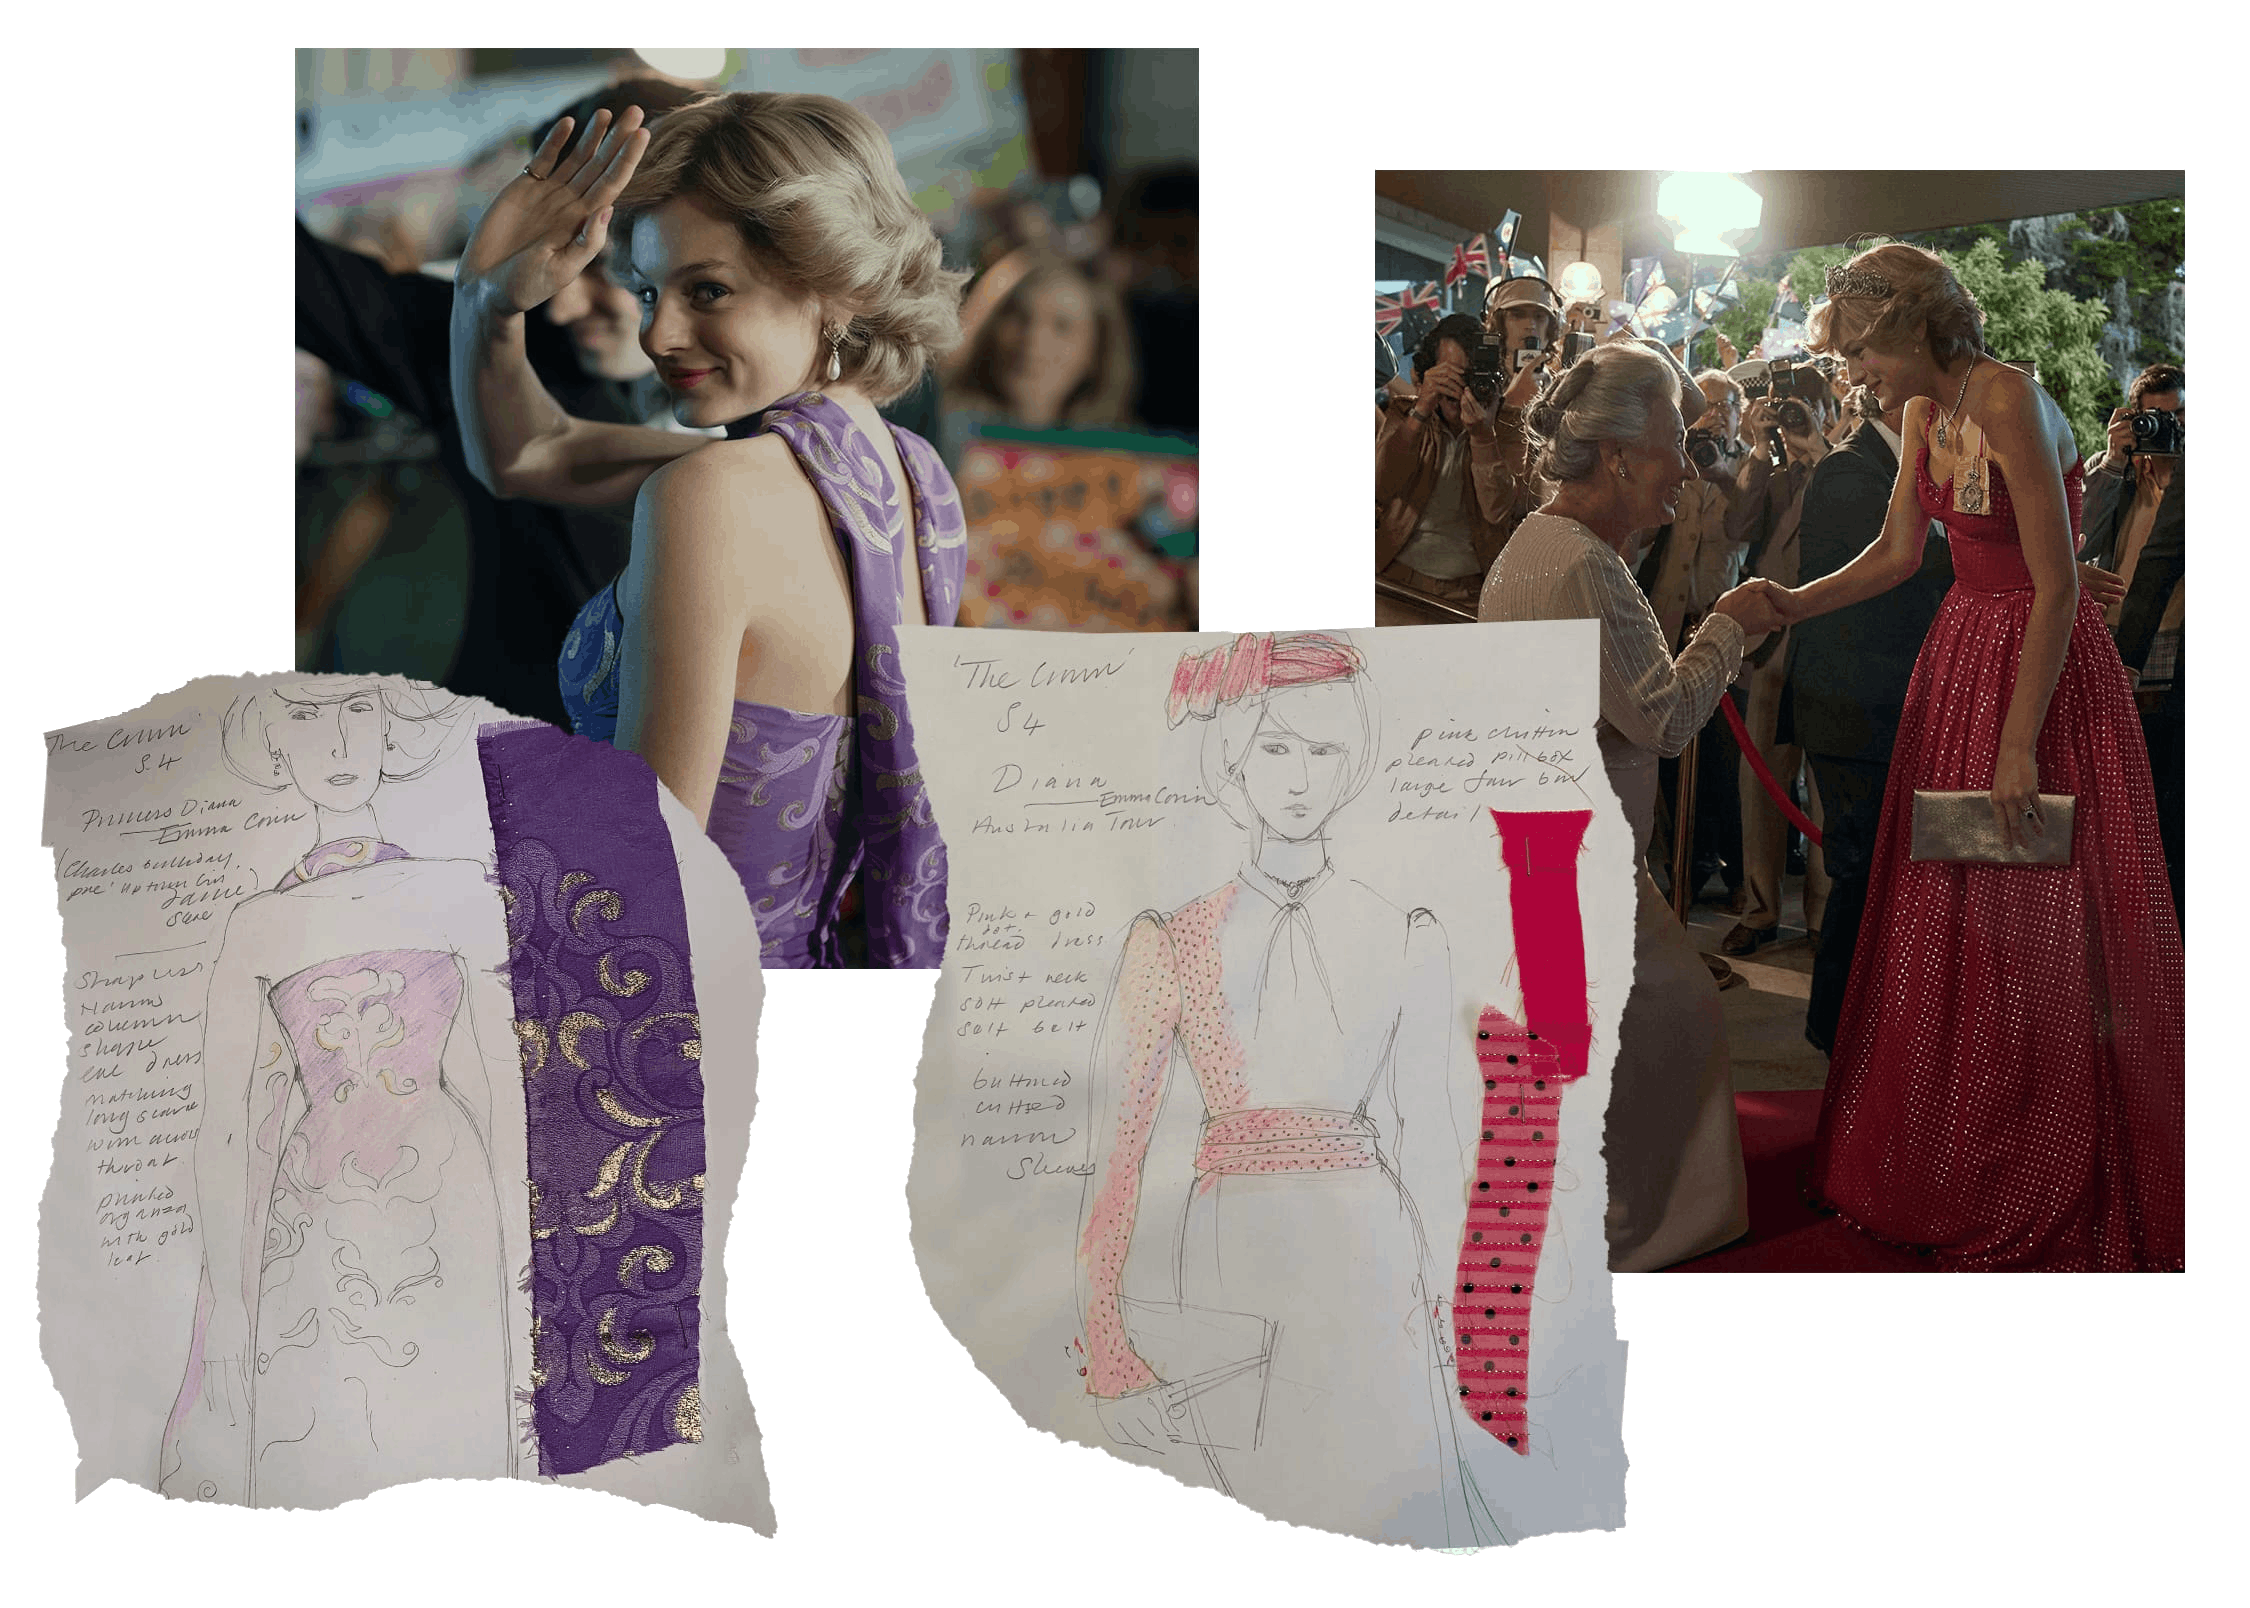 Two images are layered with the dresses’ respective swatches: one purple and one red. In the first, Diana waves over her shoulder. In the second she shakes a woman’s hand.